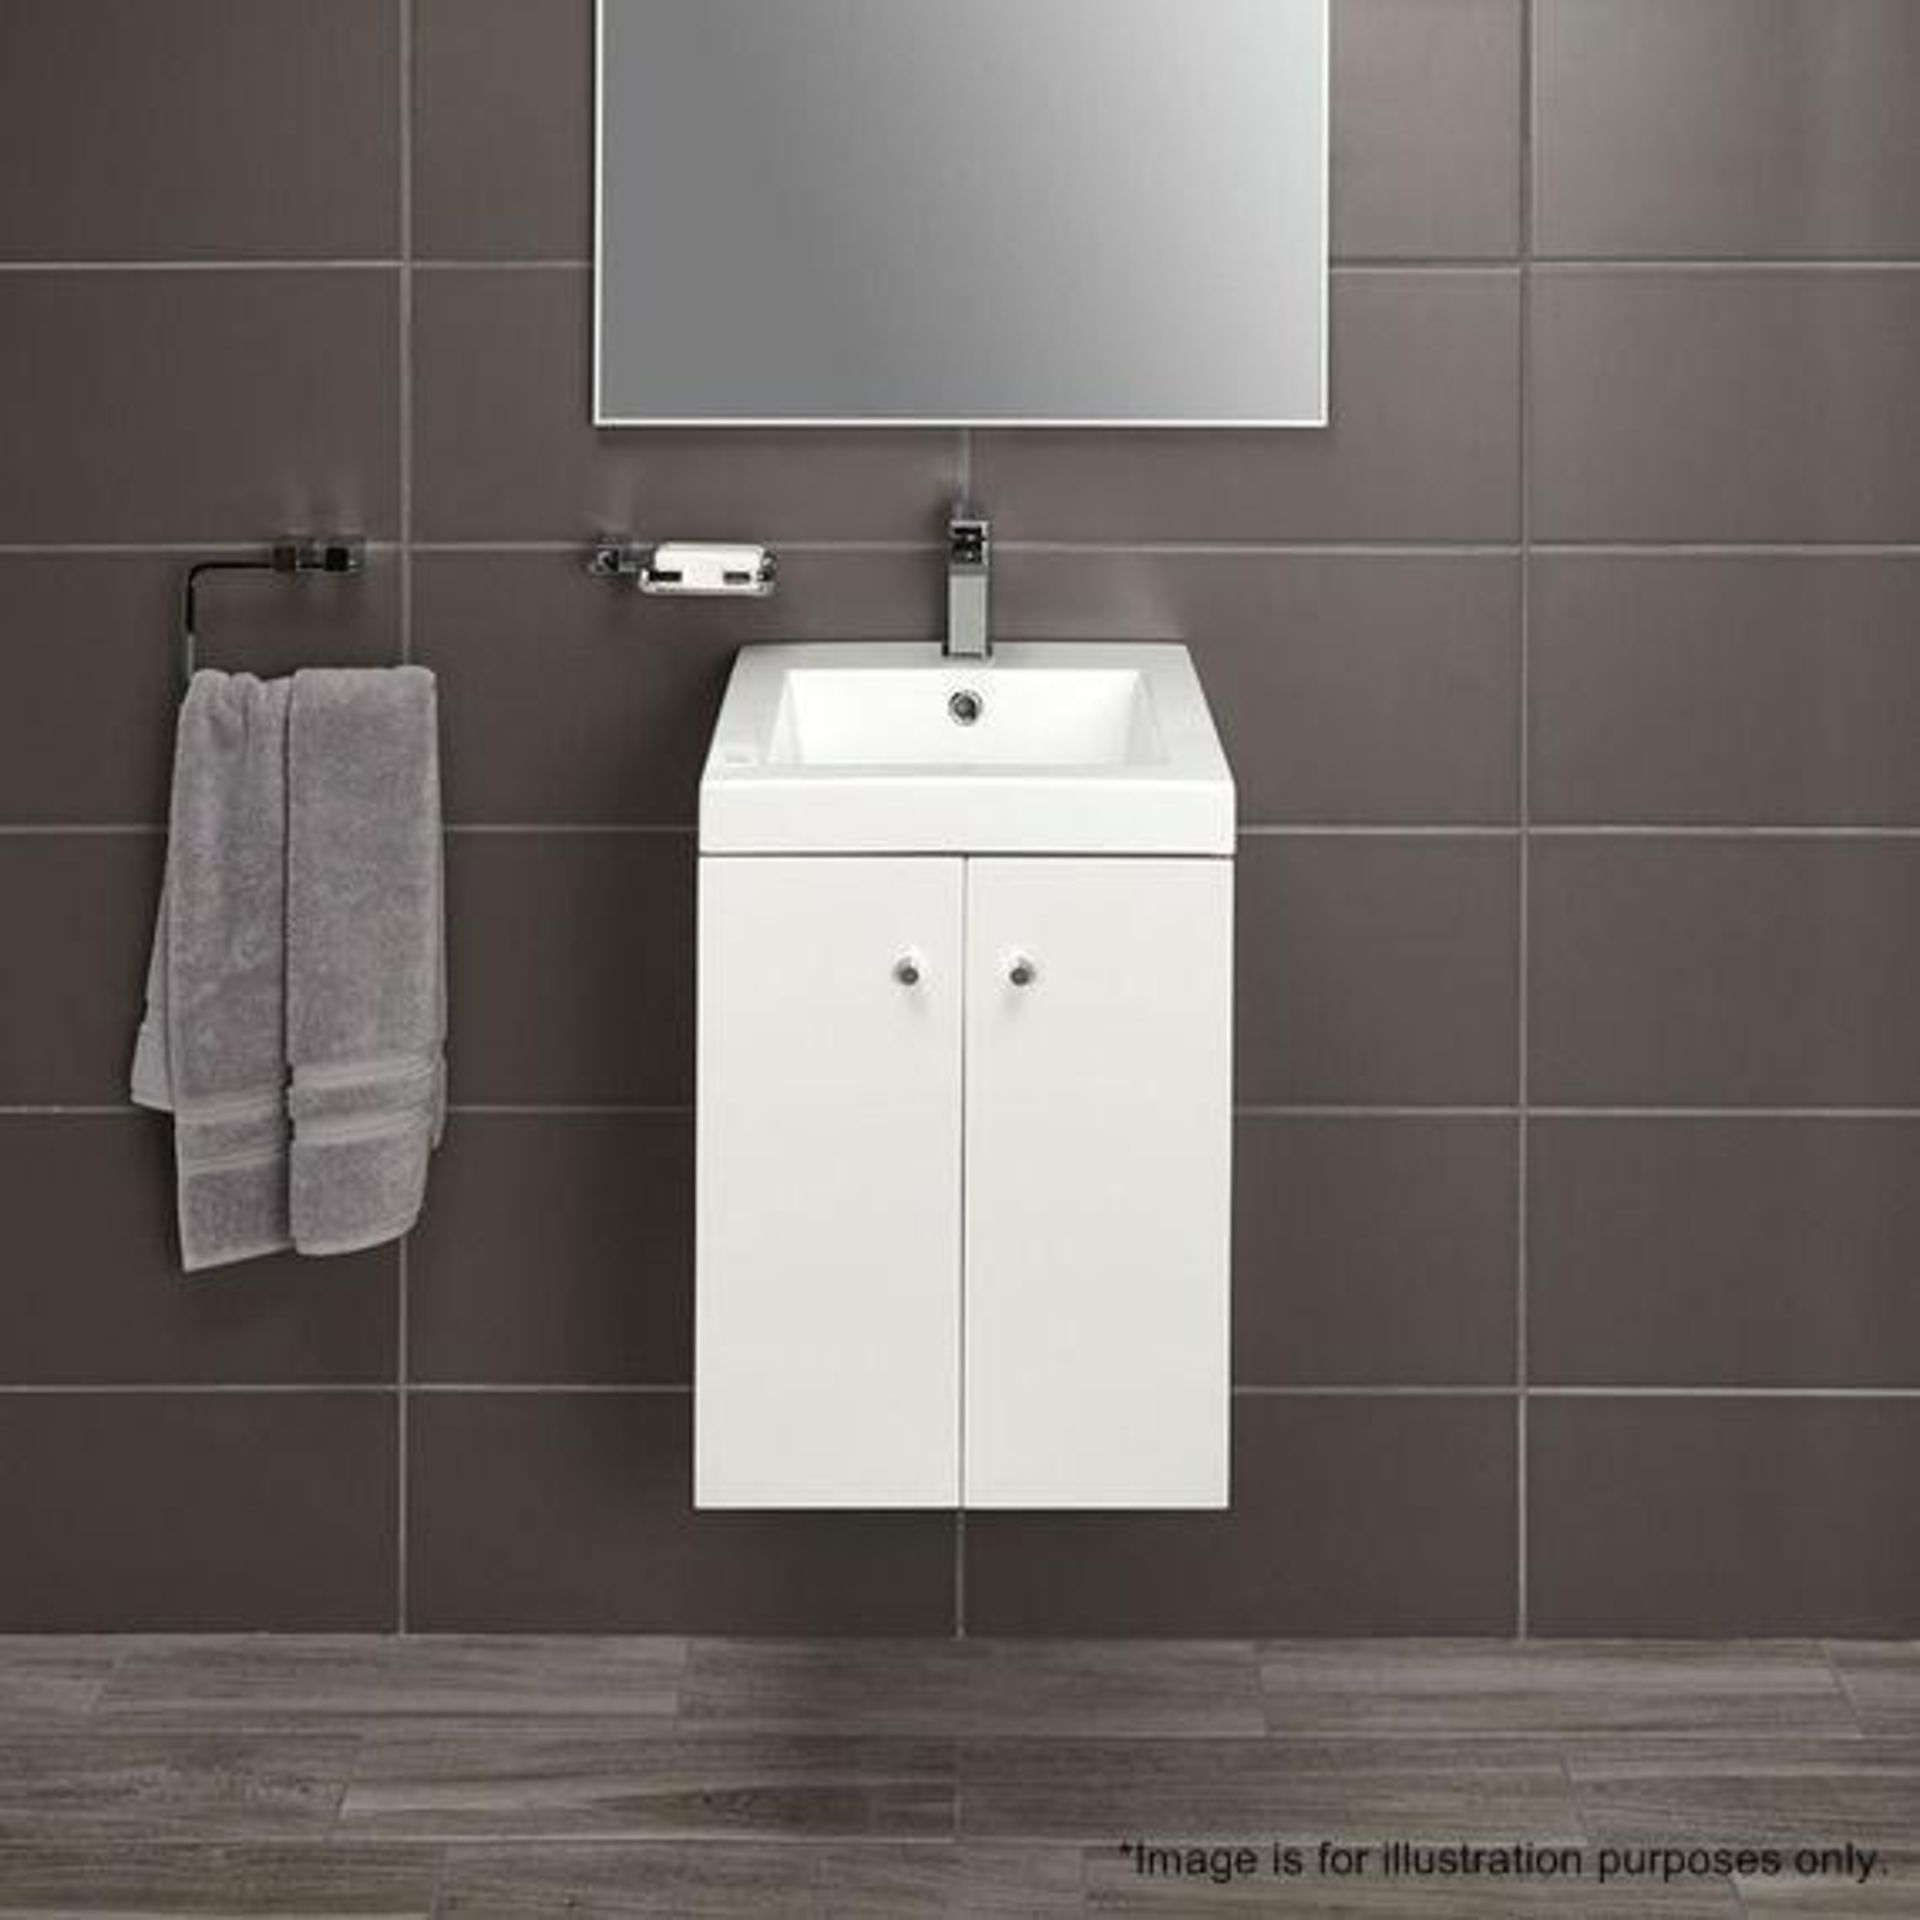 10 x Alpine Duo 400 Wall Hung Vanity Units In Gloss White - Brand New Boxed Stock - Dimensions: H49 - Image 5 of 5